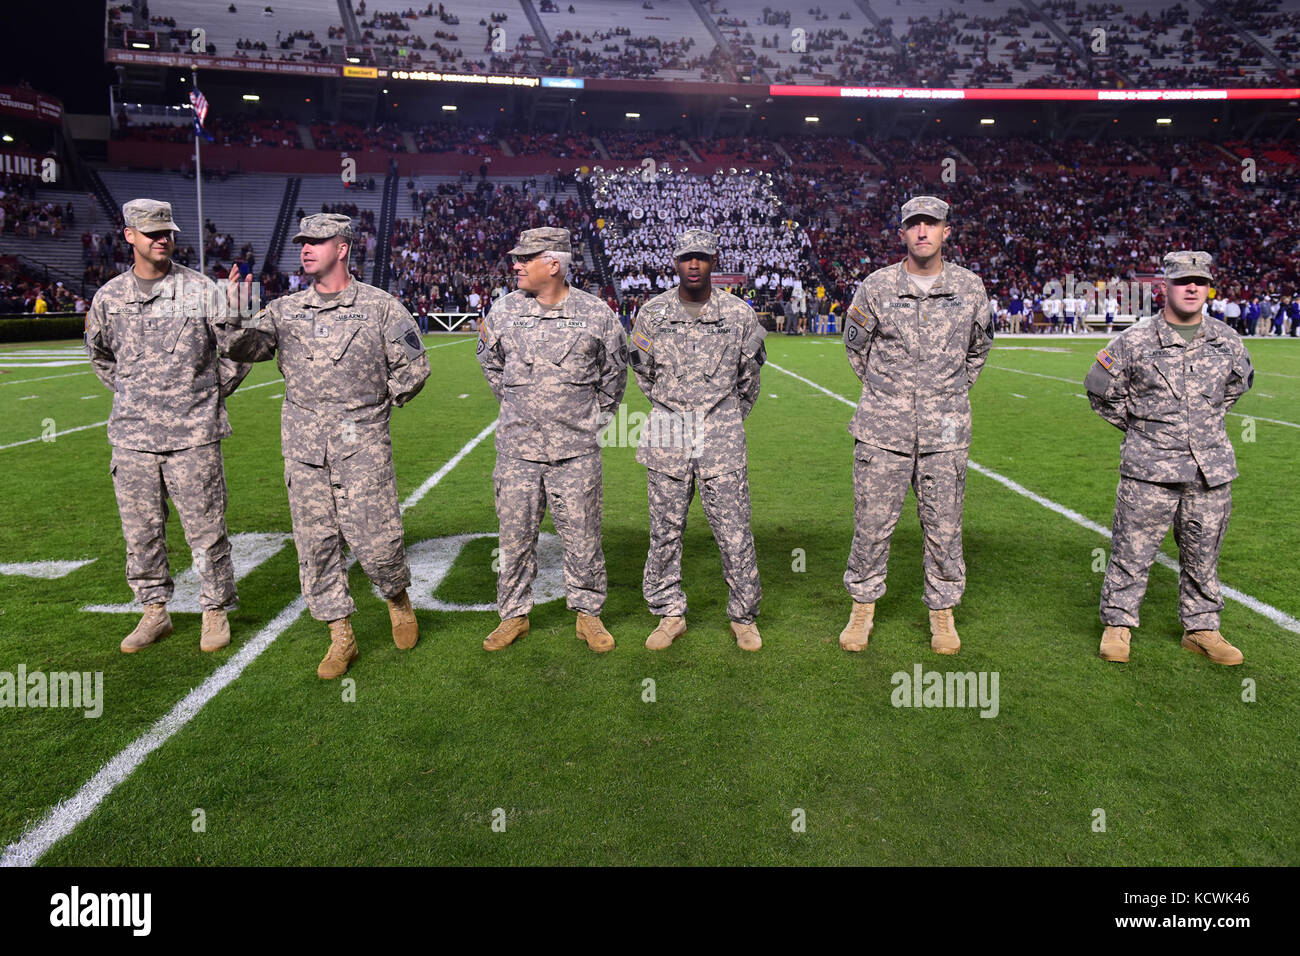 U.S. Army Chief Warrant Officer 2 Larry Gunter, South Carolina National Guard, 1-151st Attack Reconnaissance Battalion UH-64 Apache pilot, receives recognition at Williams-Brice stadium in Columbia, South Carolina, Nov. 19, 2016. The South Carolina Army National Guard conducted a fly-over in support of Fort Jackson's participation in the University of South Carolina's military appreciation game. (U.S. Air National Guard photo by Airman 1st Class Megan Floyd) Stock Photo